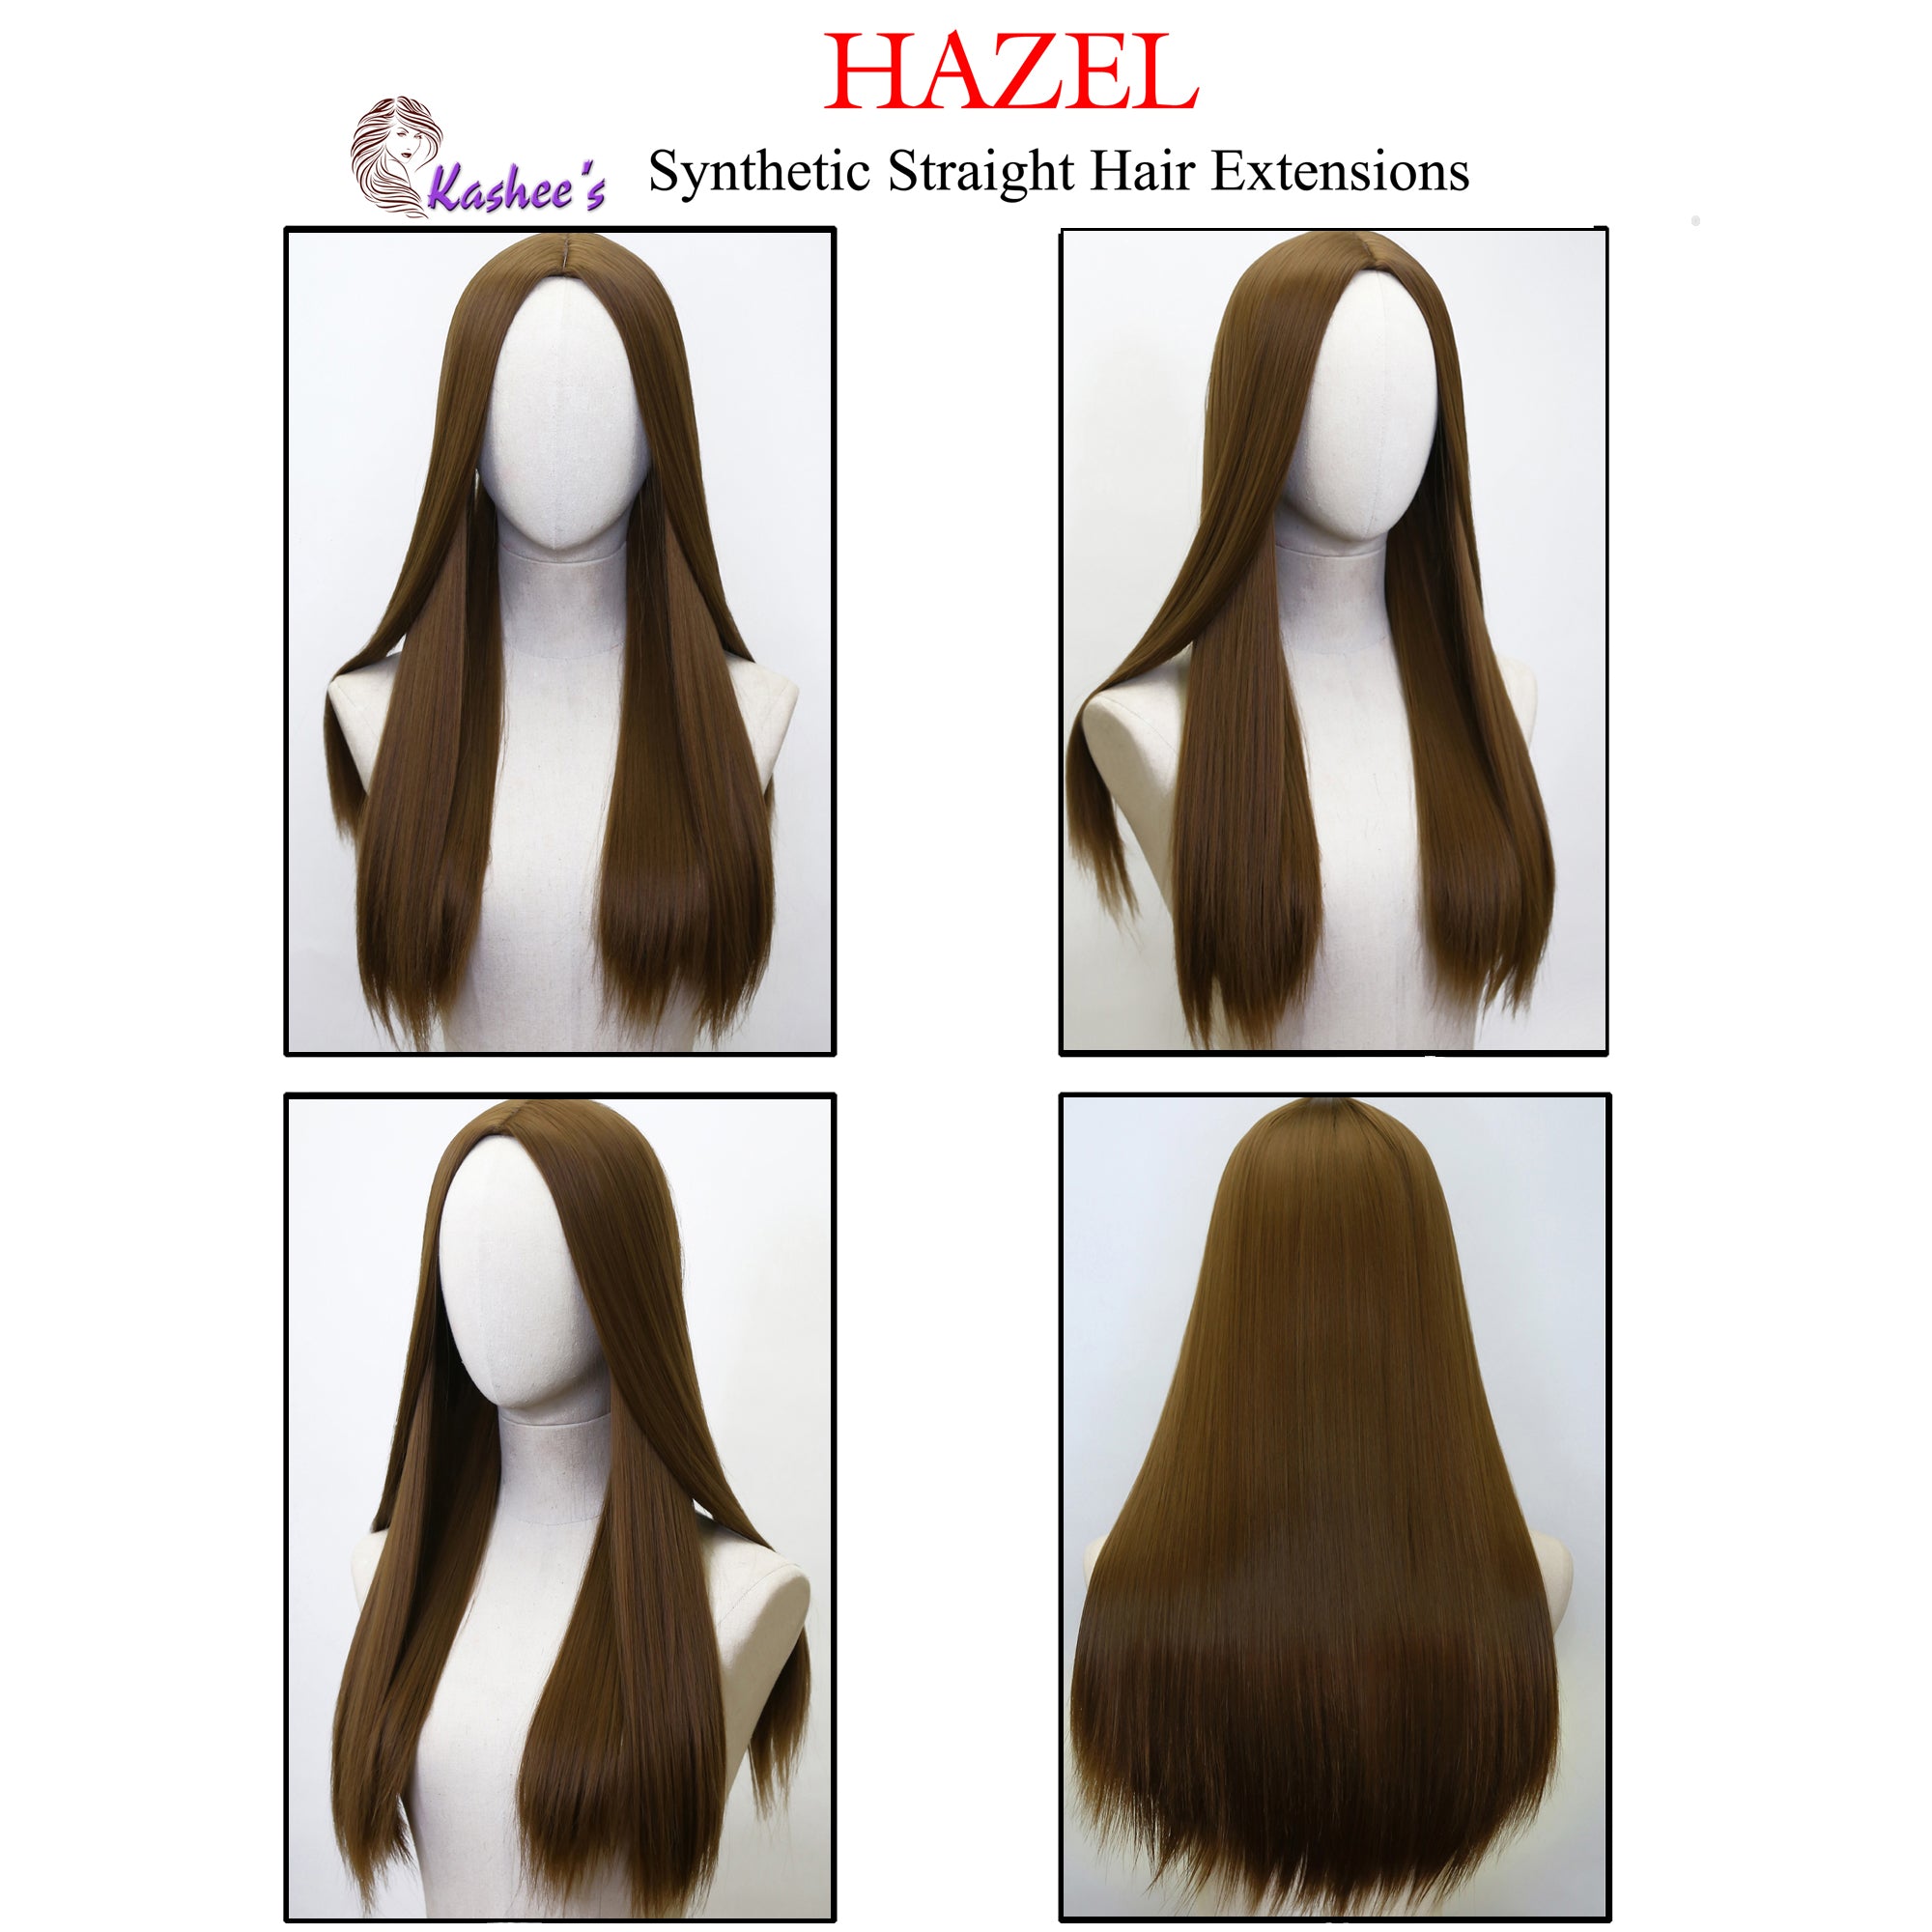 Kashee’s Synthetic Straight Hair Extensions 75% Off